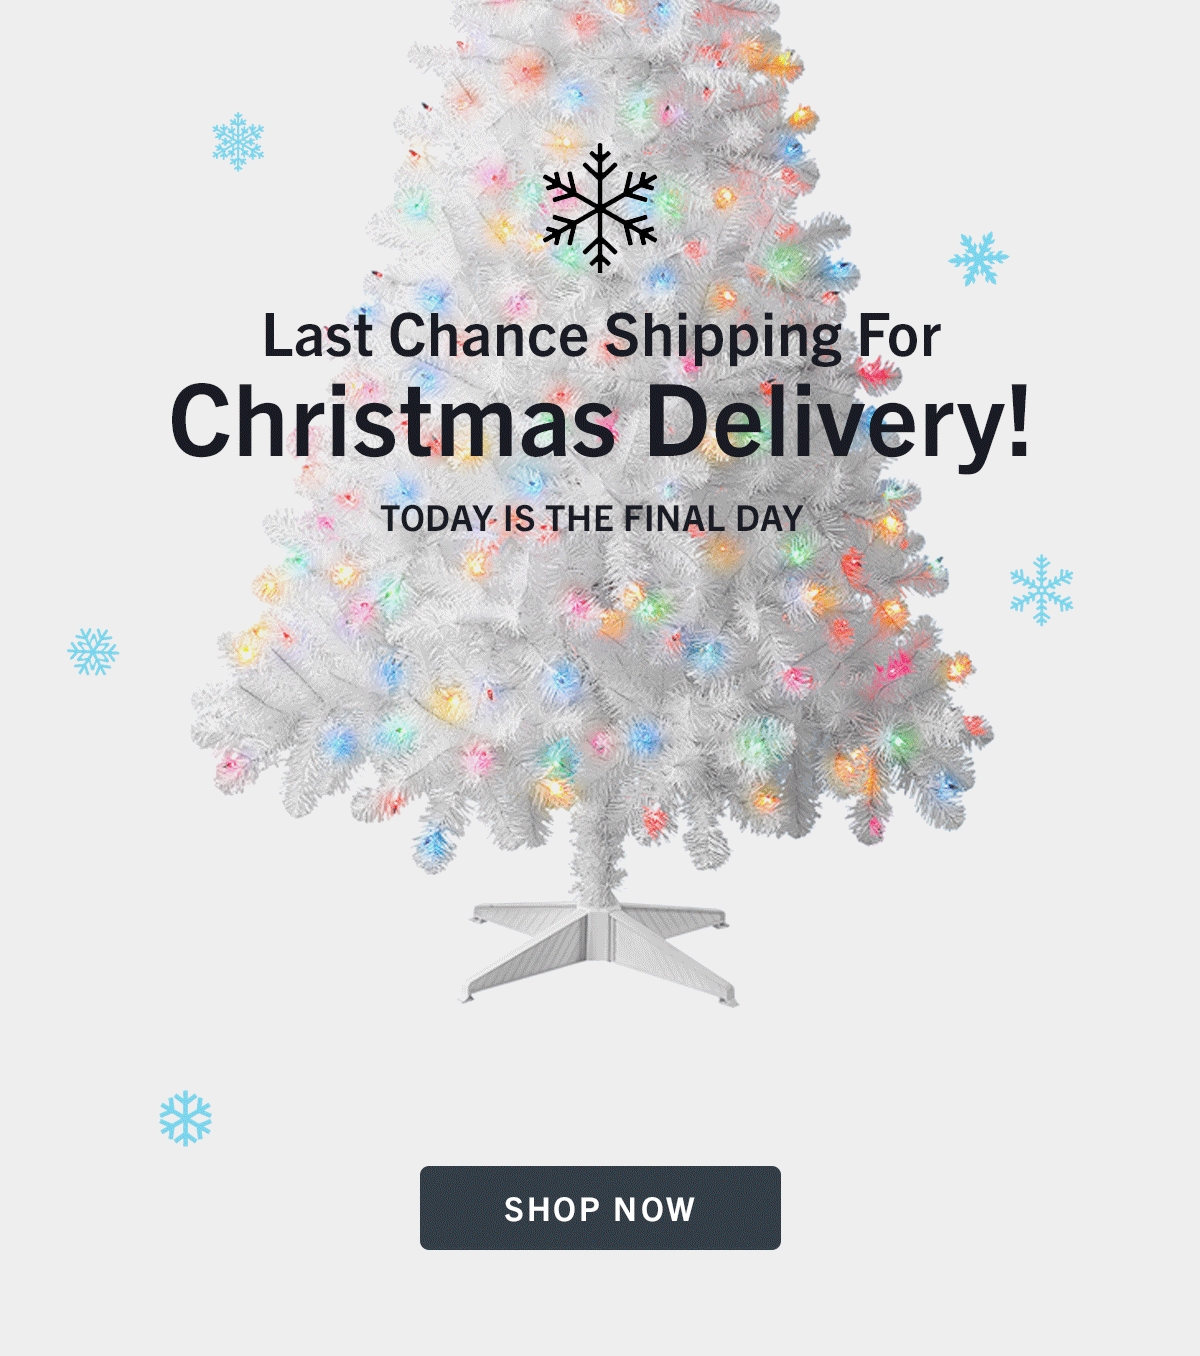 Last Chance Shipping For Christmas Deliver! Today is the final day